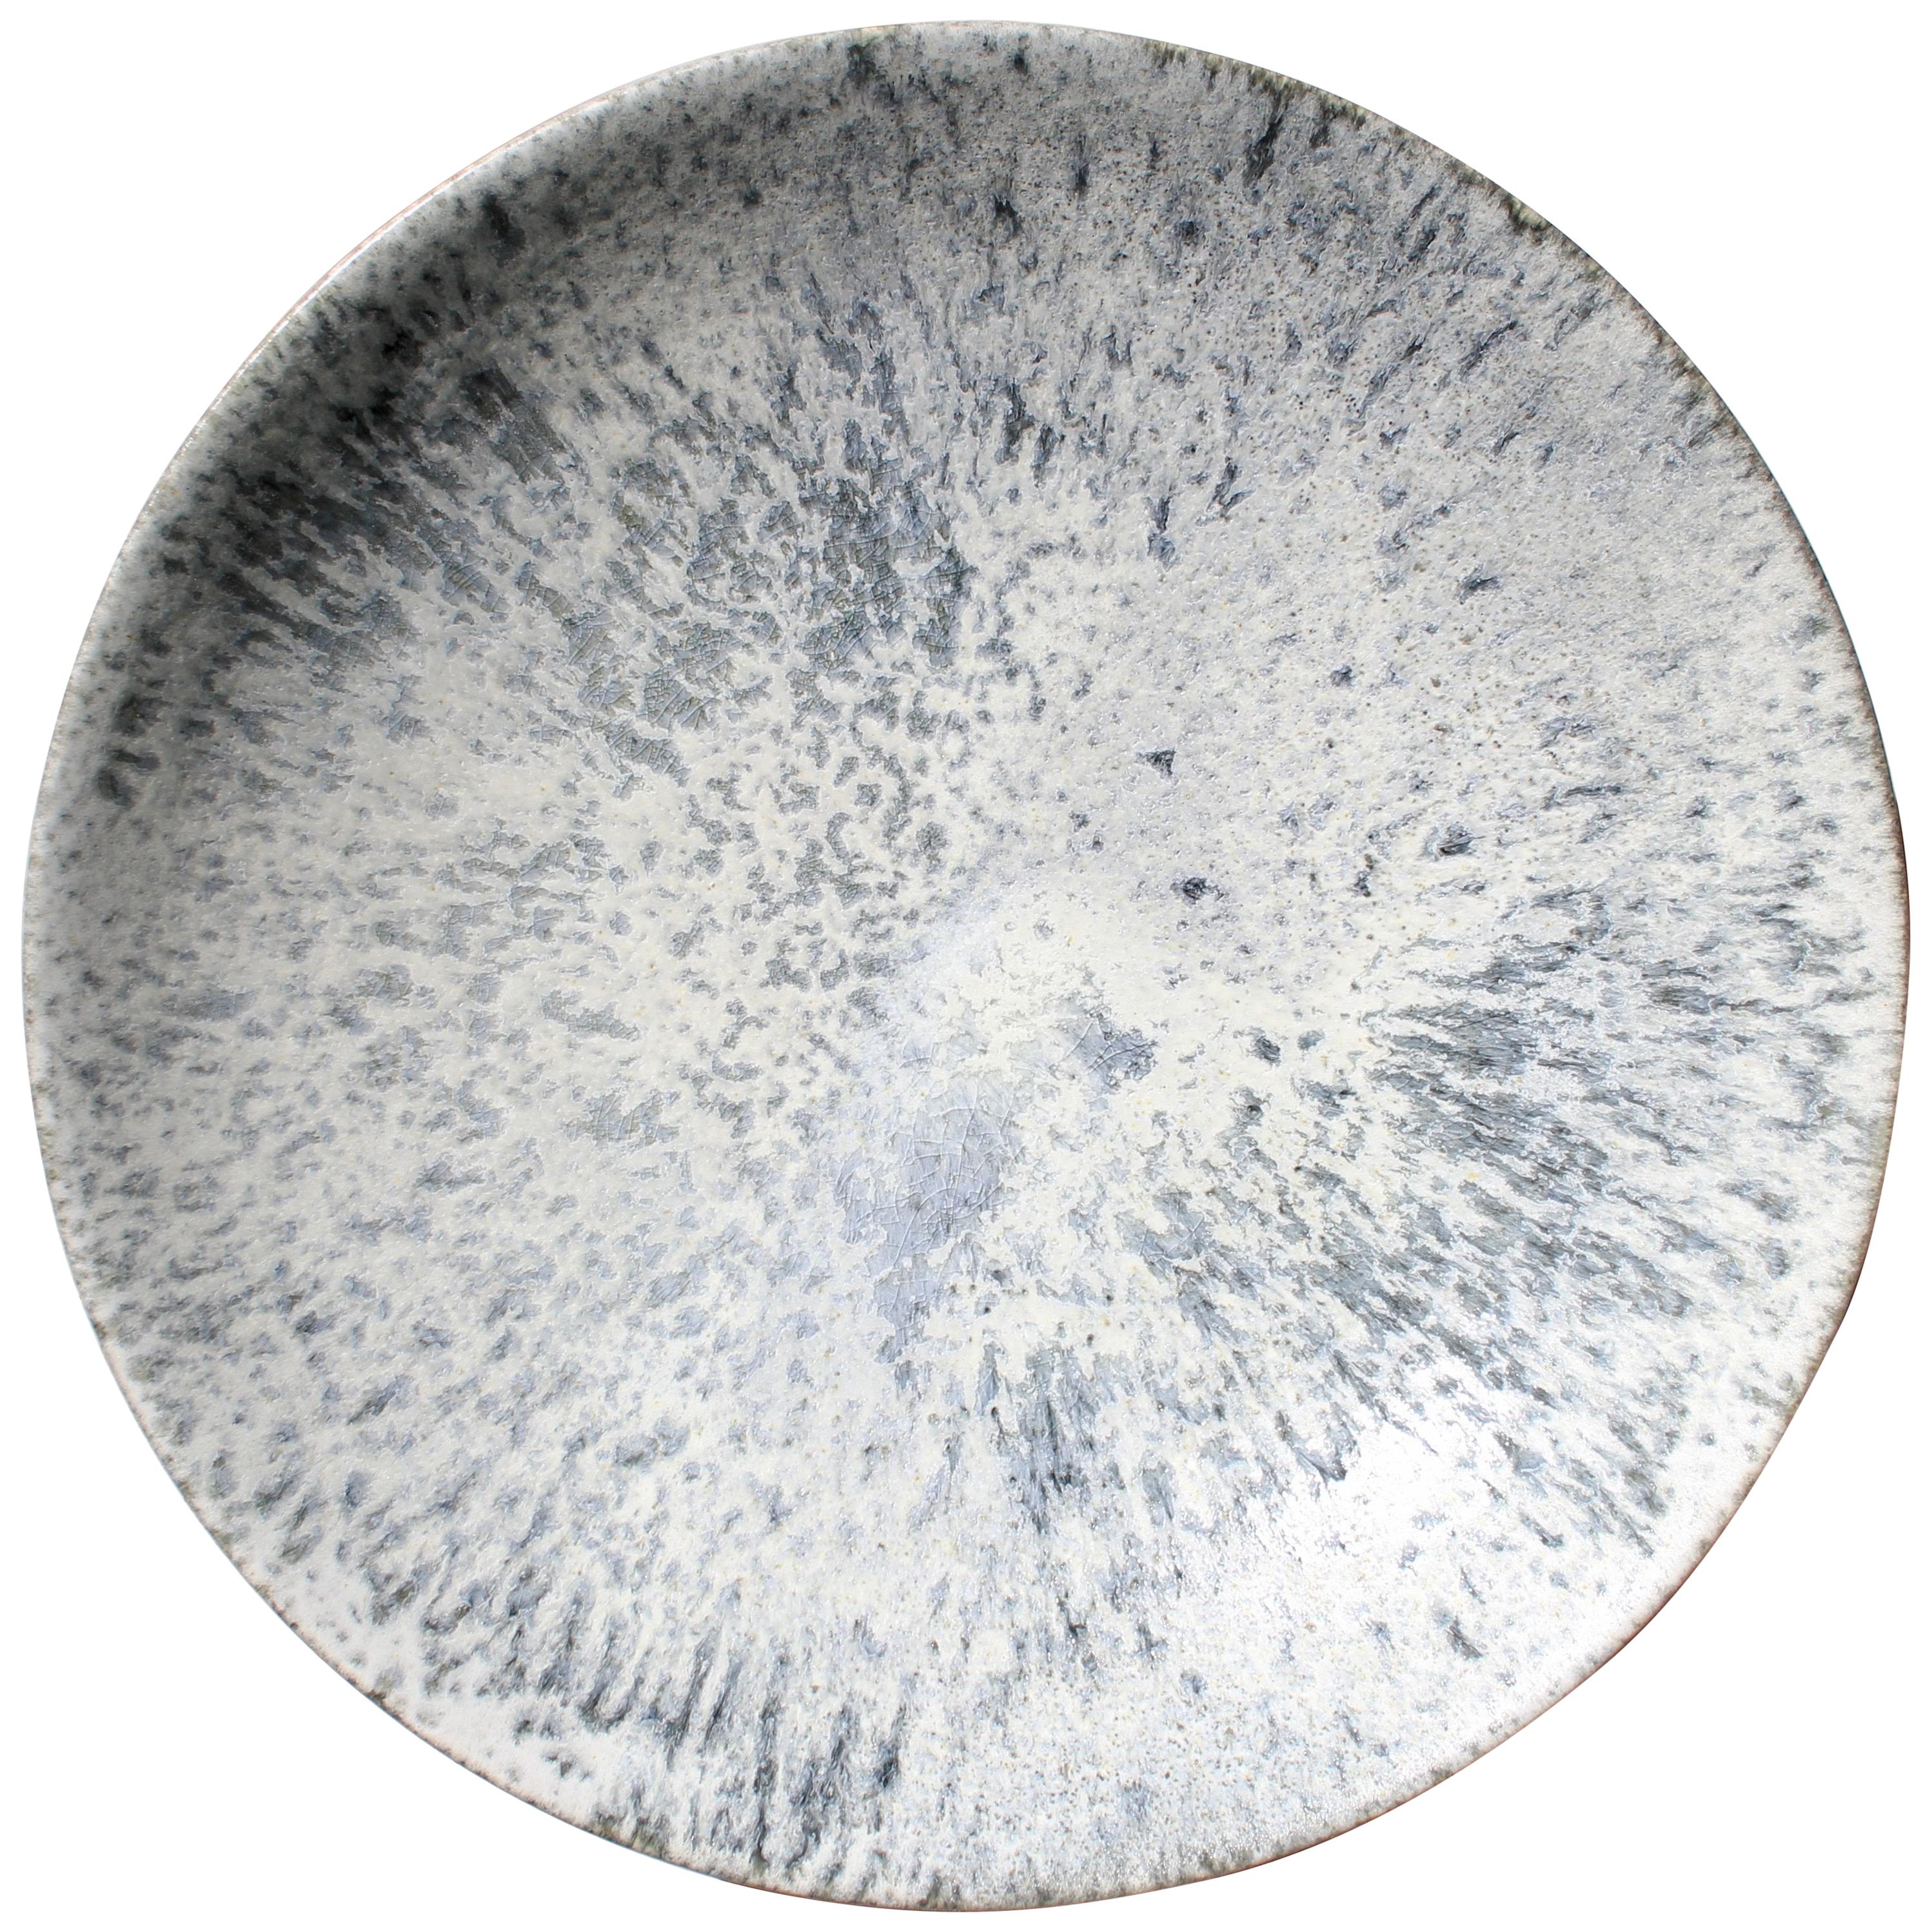 Very Large Curved Platter in White & Blue Glaze